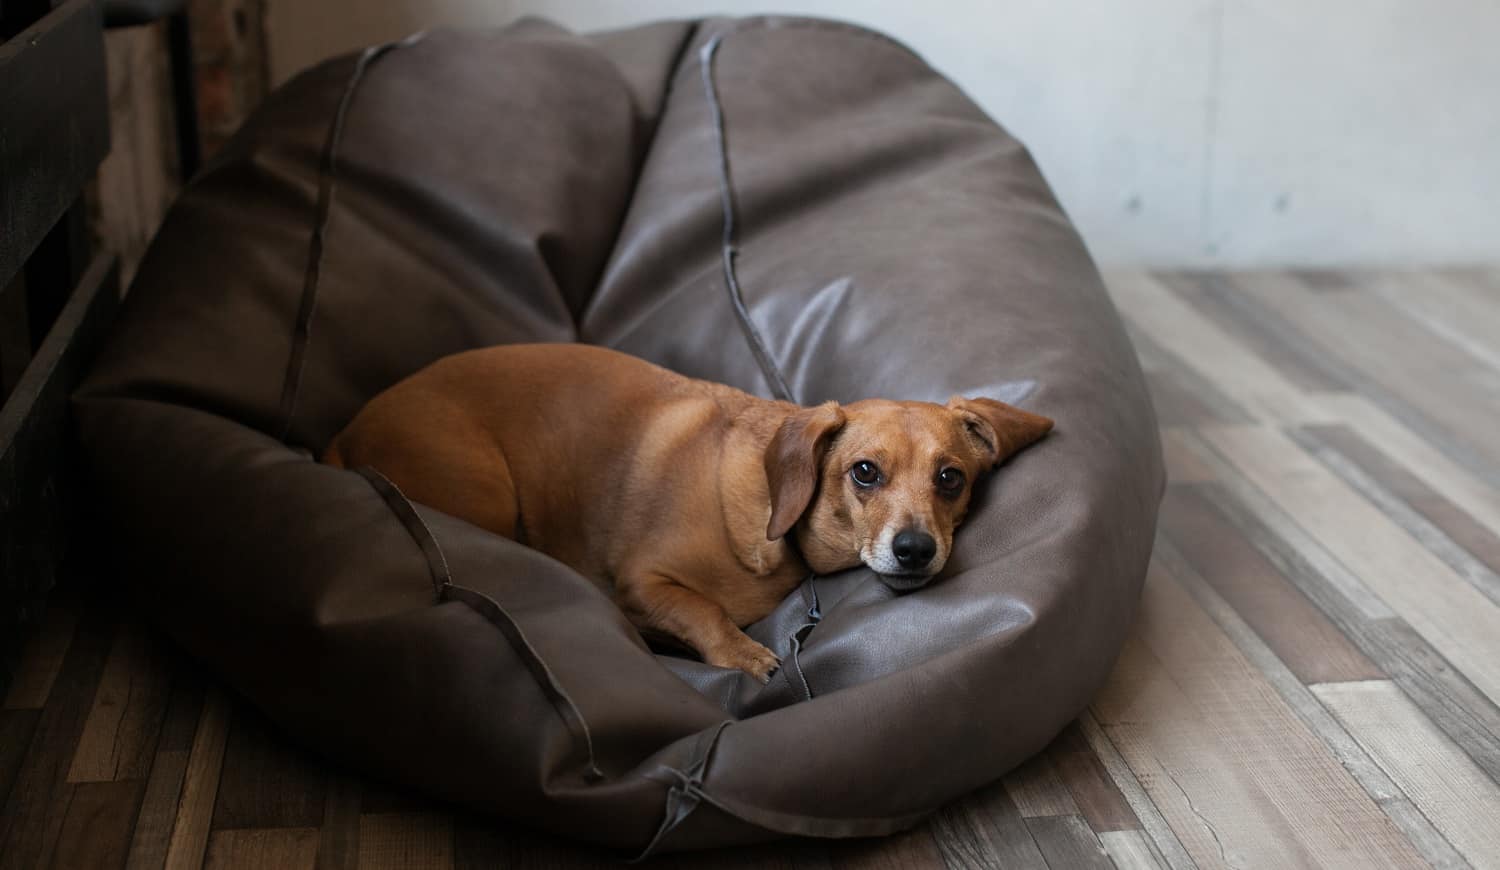 Portrait Of An Adult Plump Dachshund Dog Lying On A Leather Bean Bag Chair In Loft Apartment. The Dog Looks Sadly At The Camera. Best Bean Bag Chair Verdict